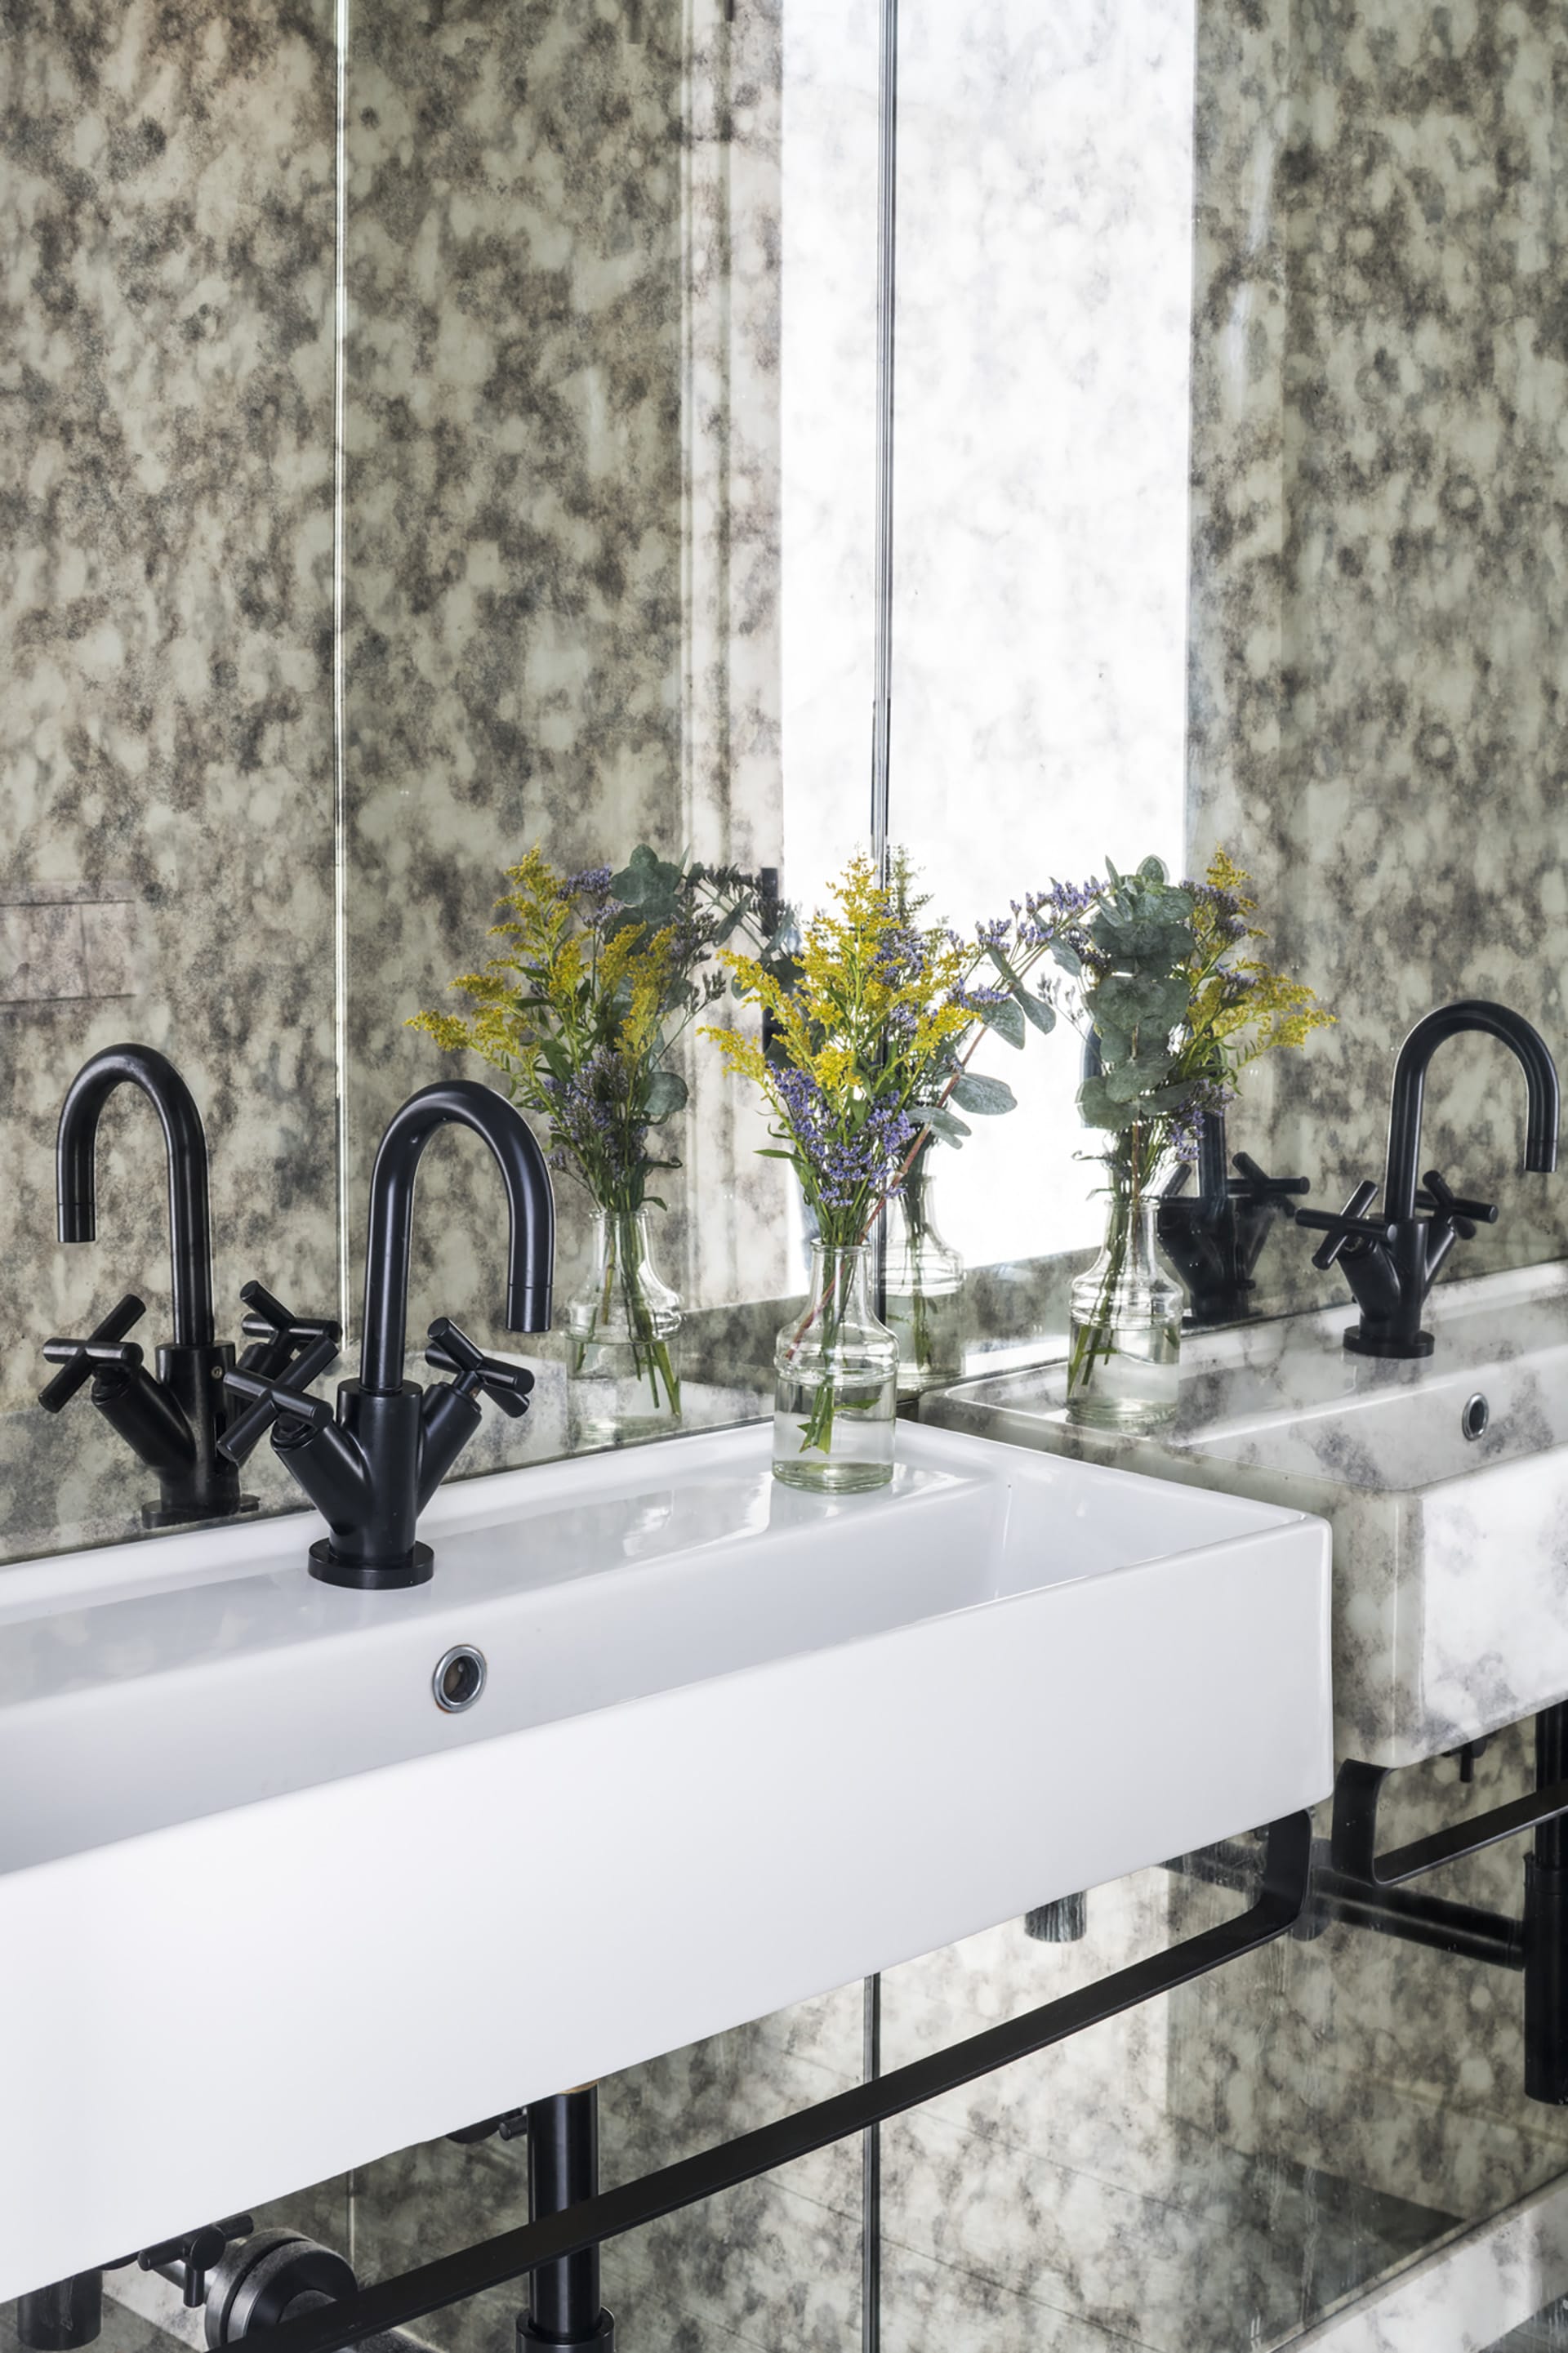 Powder room with patterned wallpaper, black fixtures, and yellow flowers